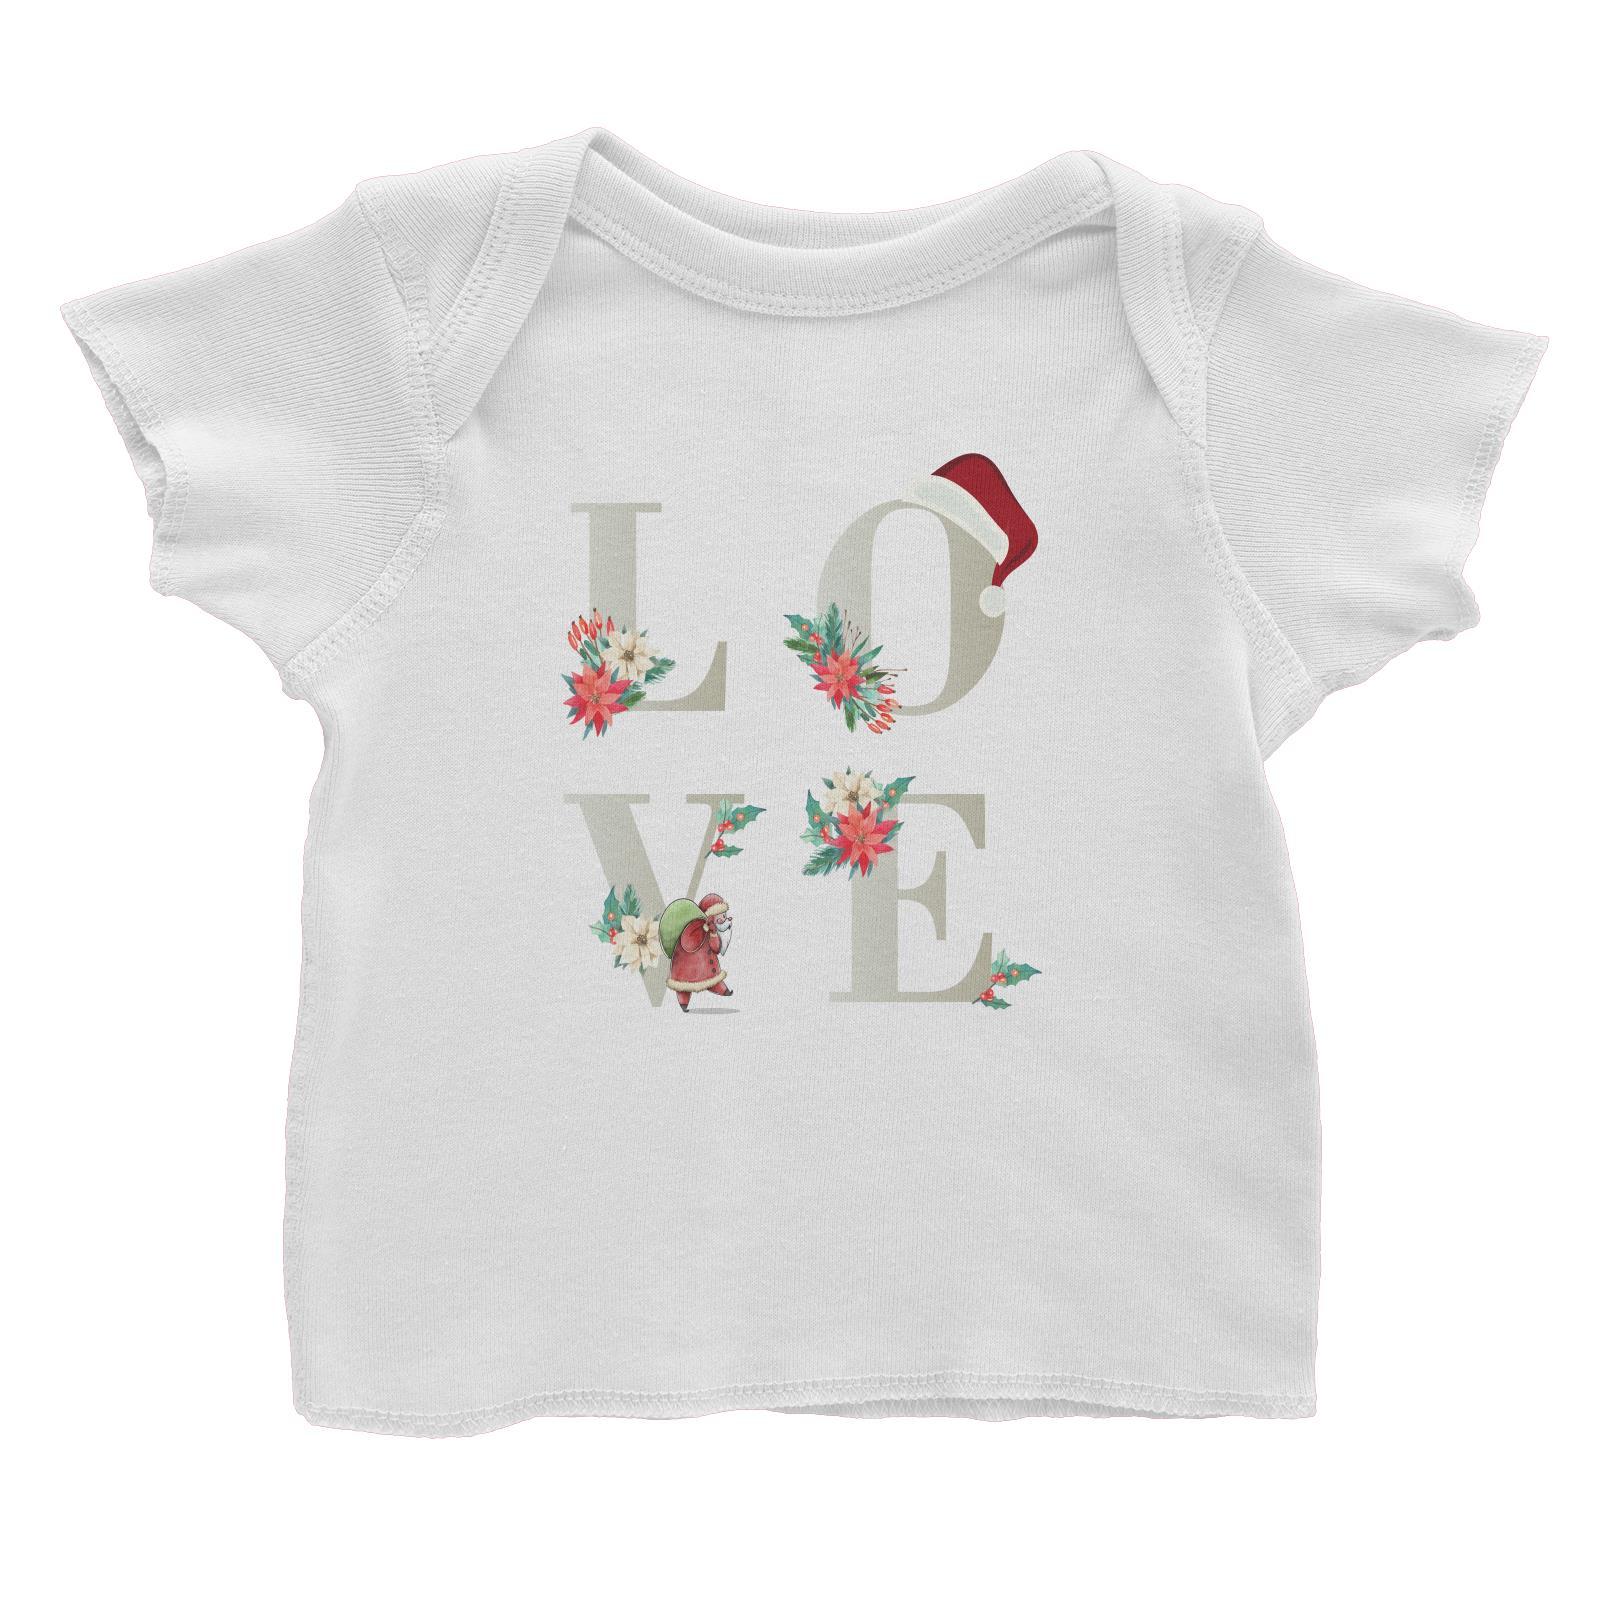 LOVE with Christmas Elements Baby T-Shirt  Matching Family Personalisable Designs